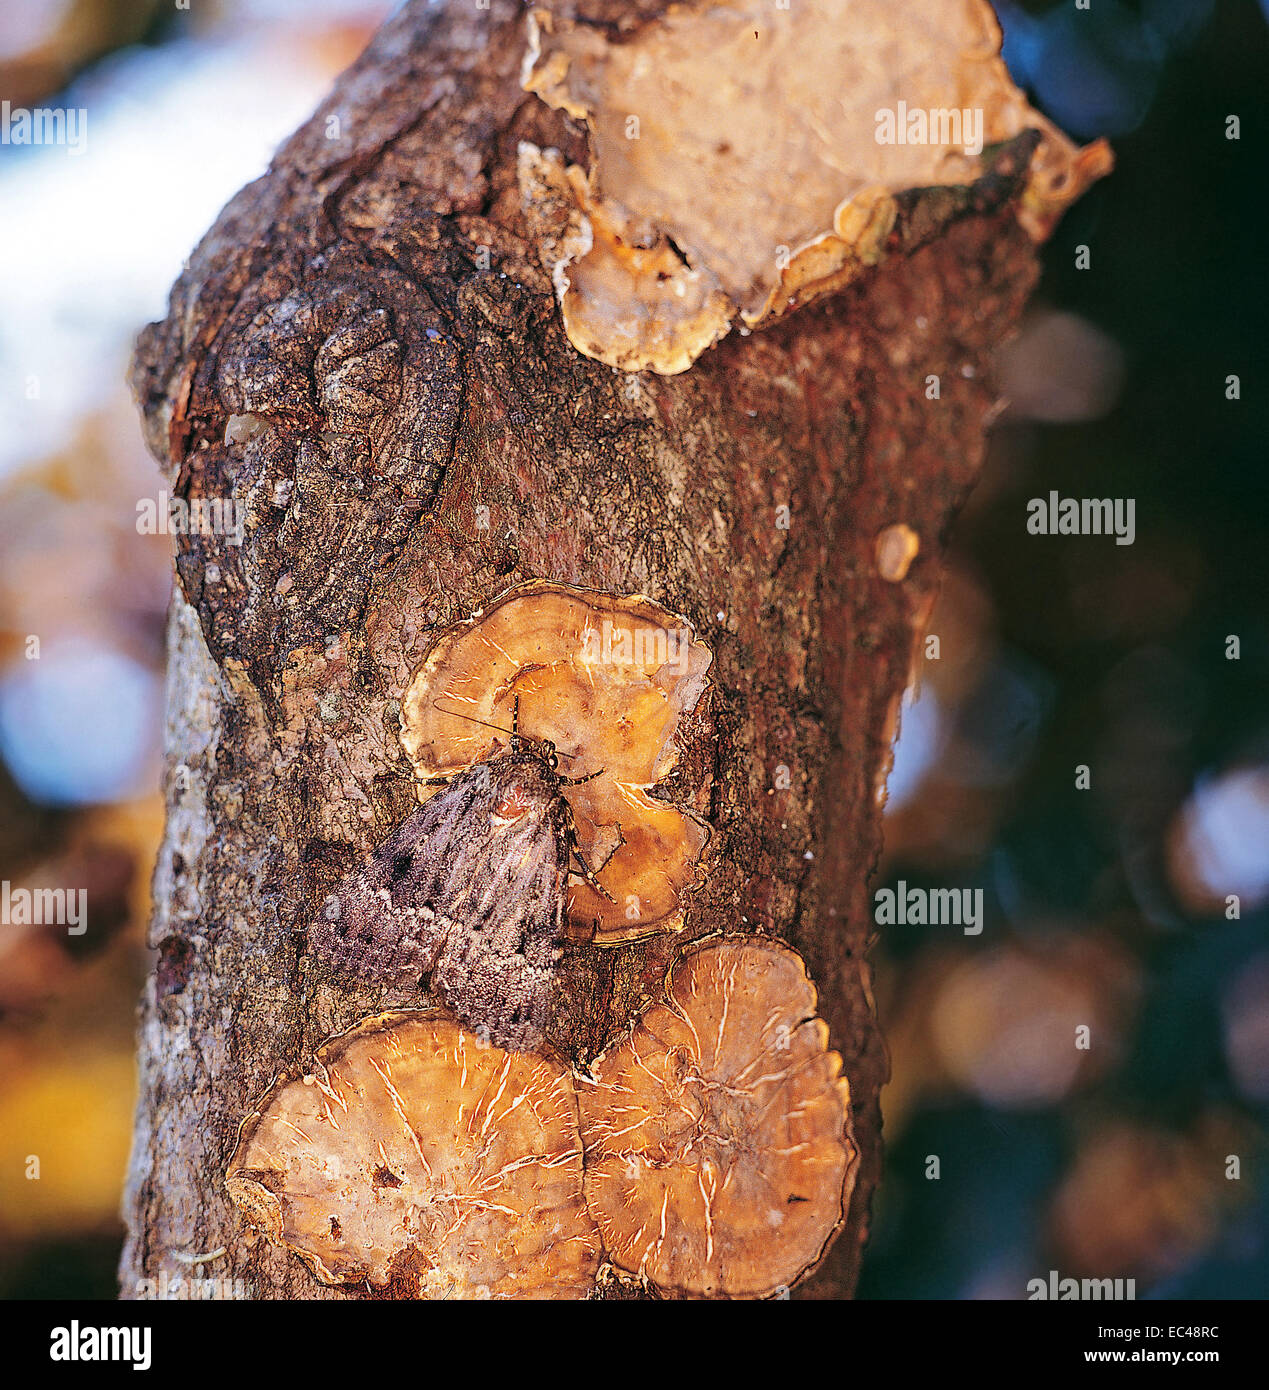 Mimicry -  Svensson's copper underwing Moth (Amphipyra berbera) camouflaged on bark tree with lichens Stock Photo